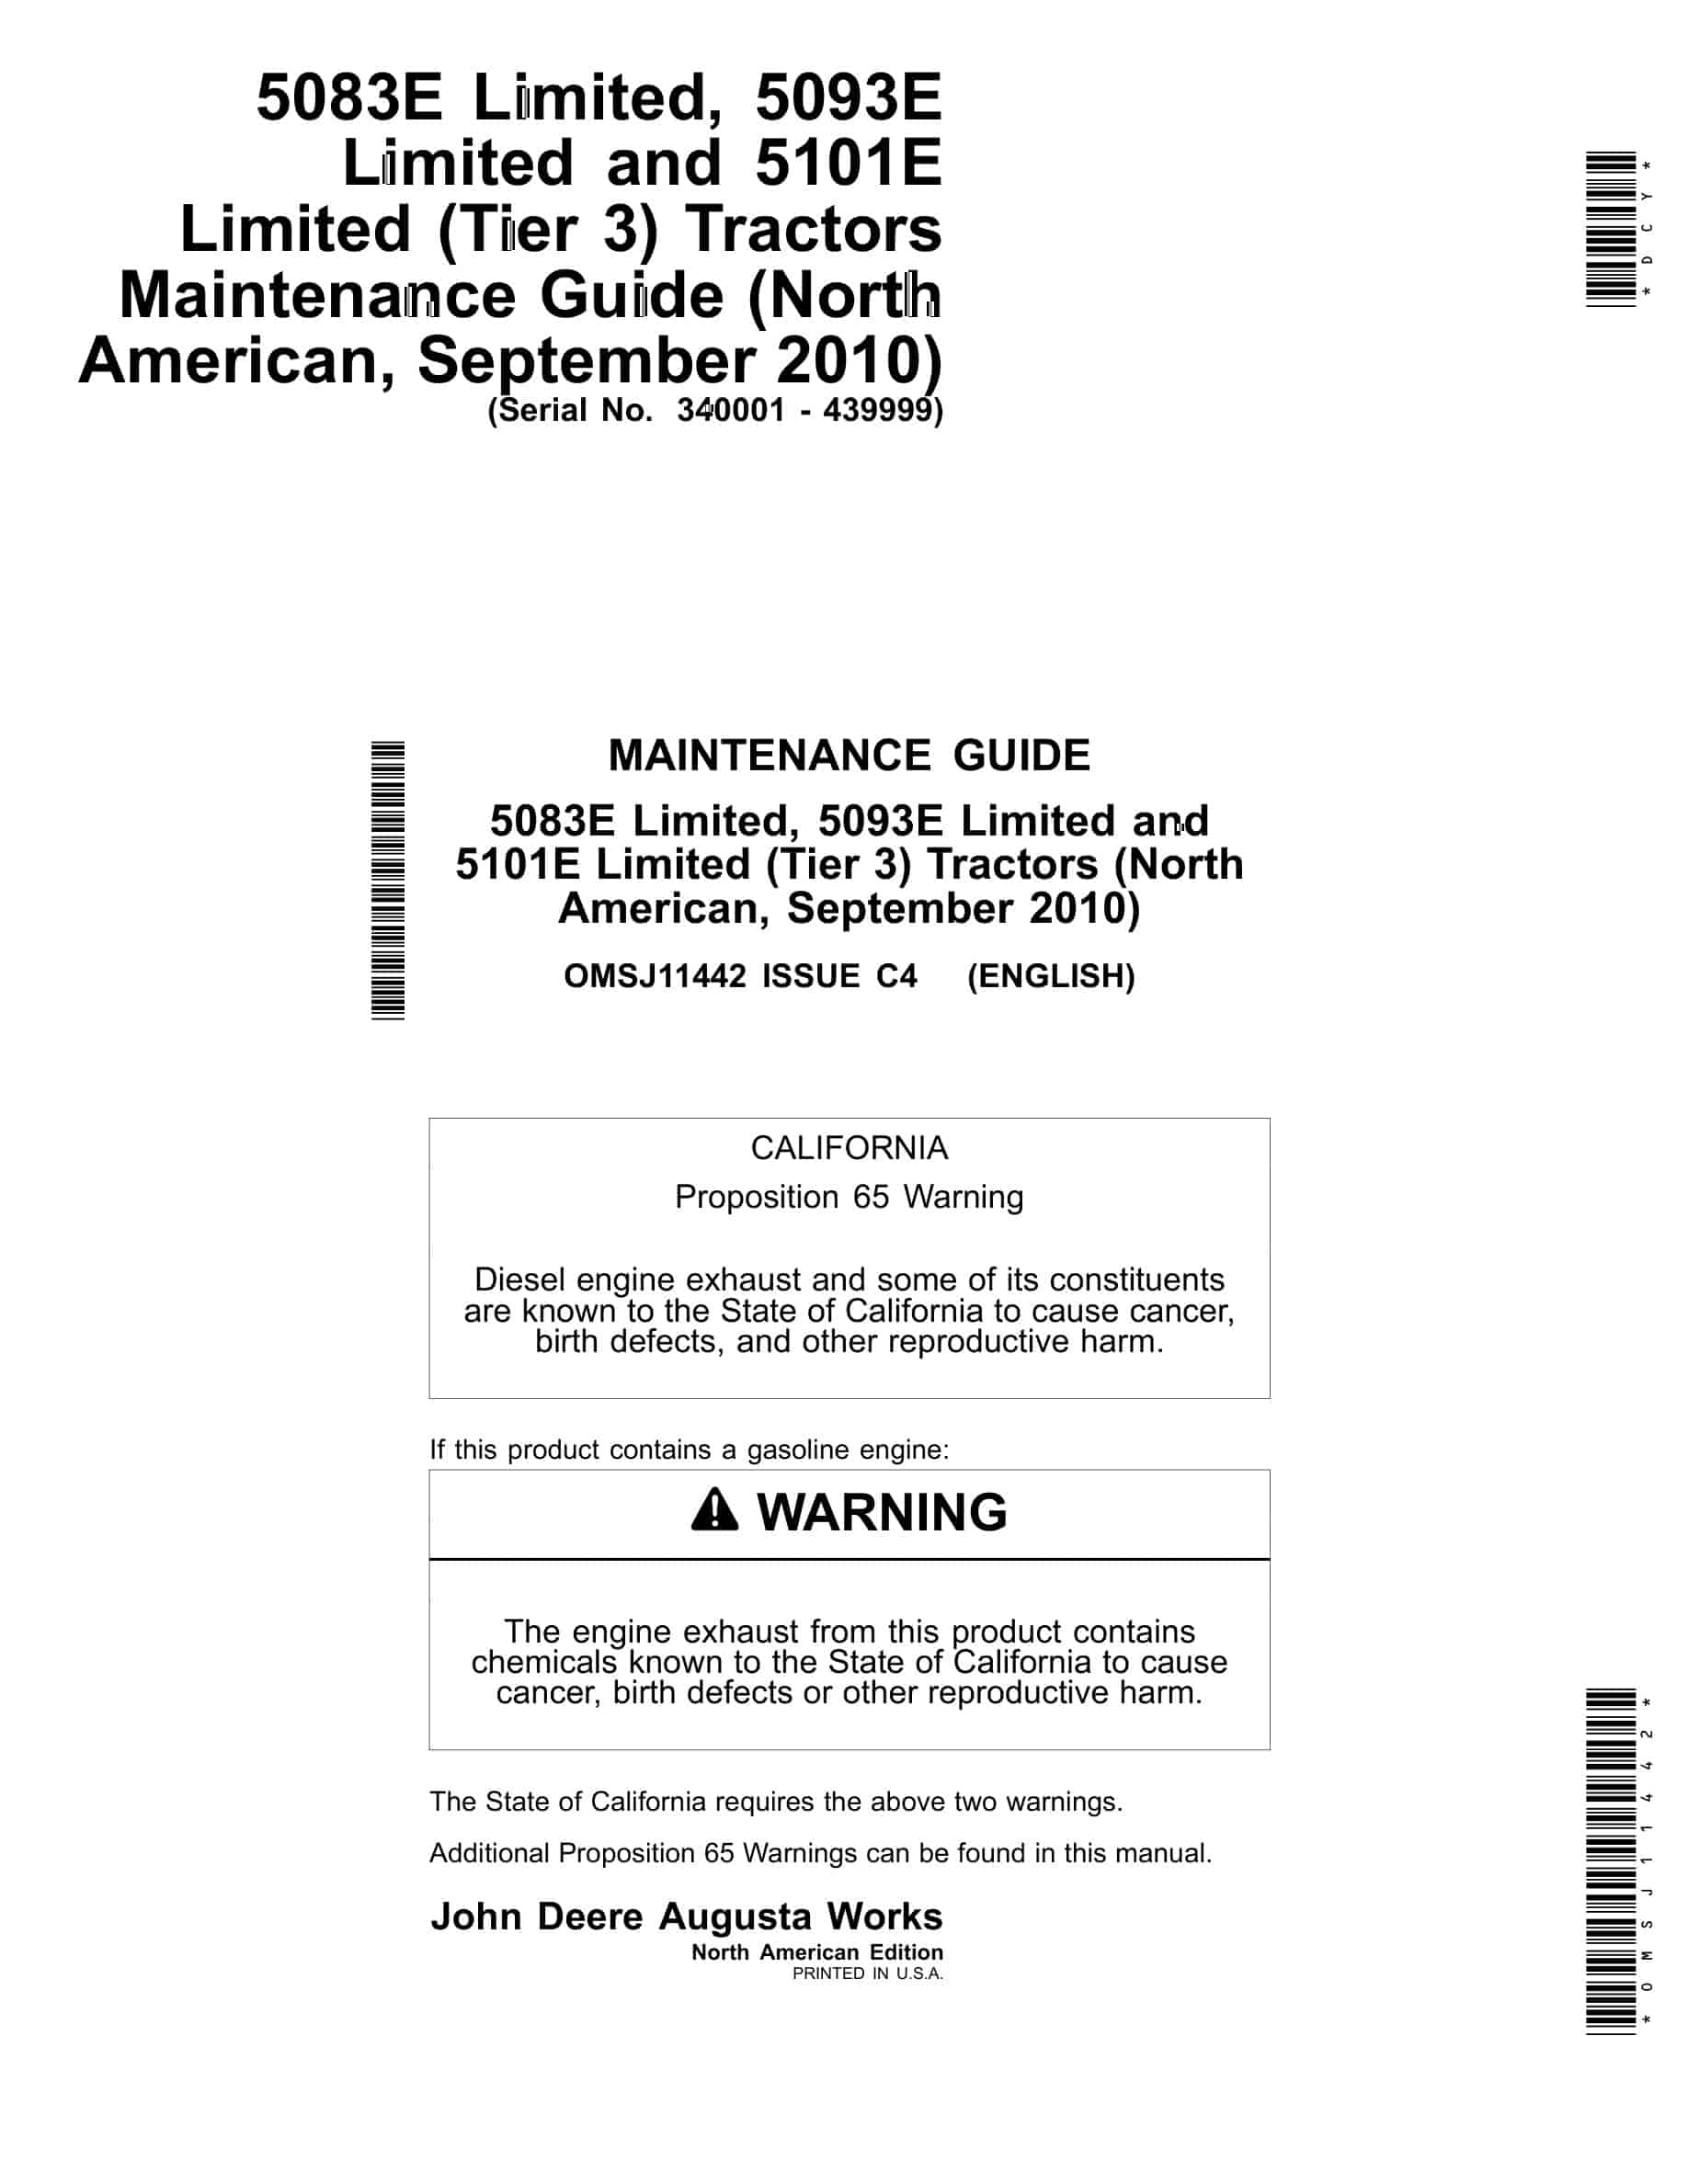 John Deere 5083E Limited, 5093E Limited and 5101E Limited (Tier 3) Tractor Operator Manual OMSJ11442-1